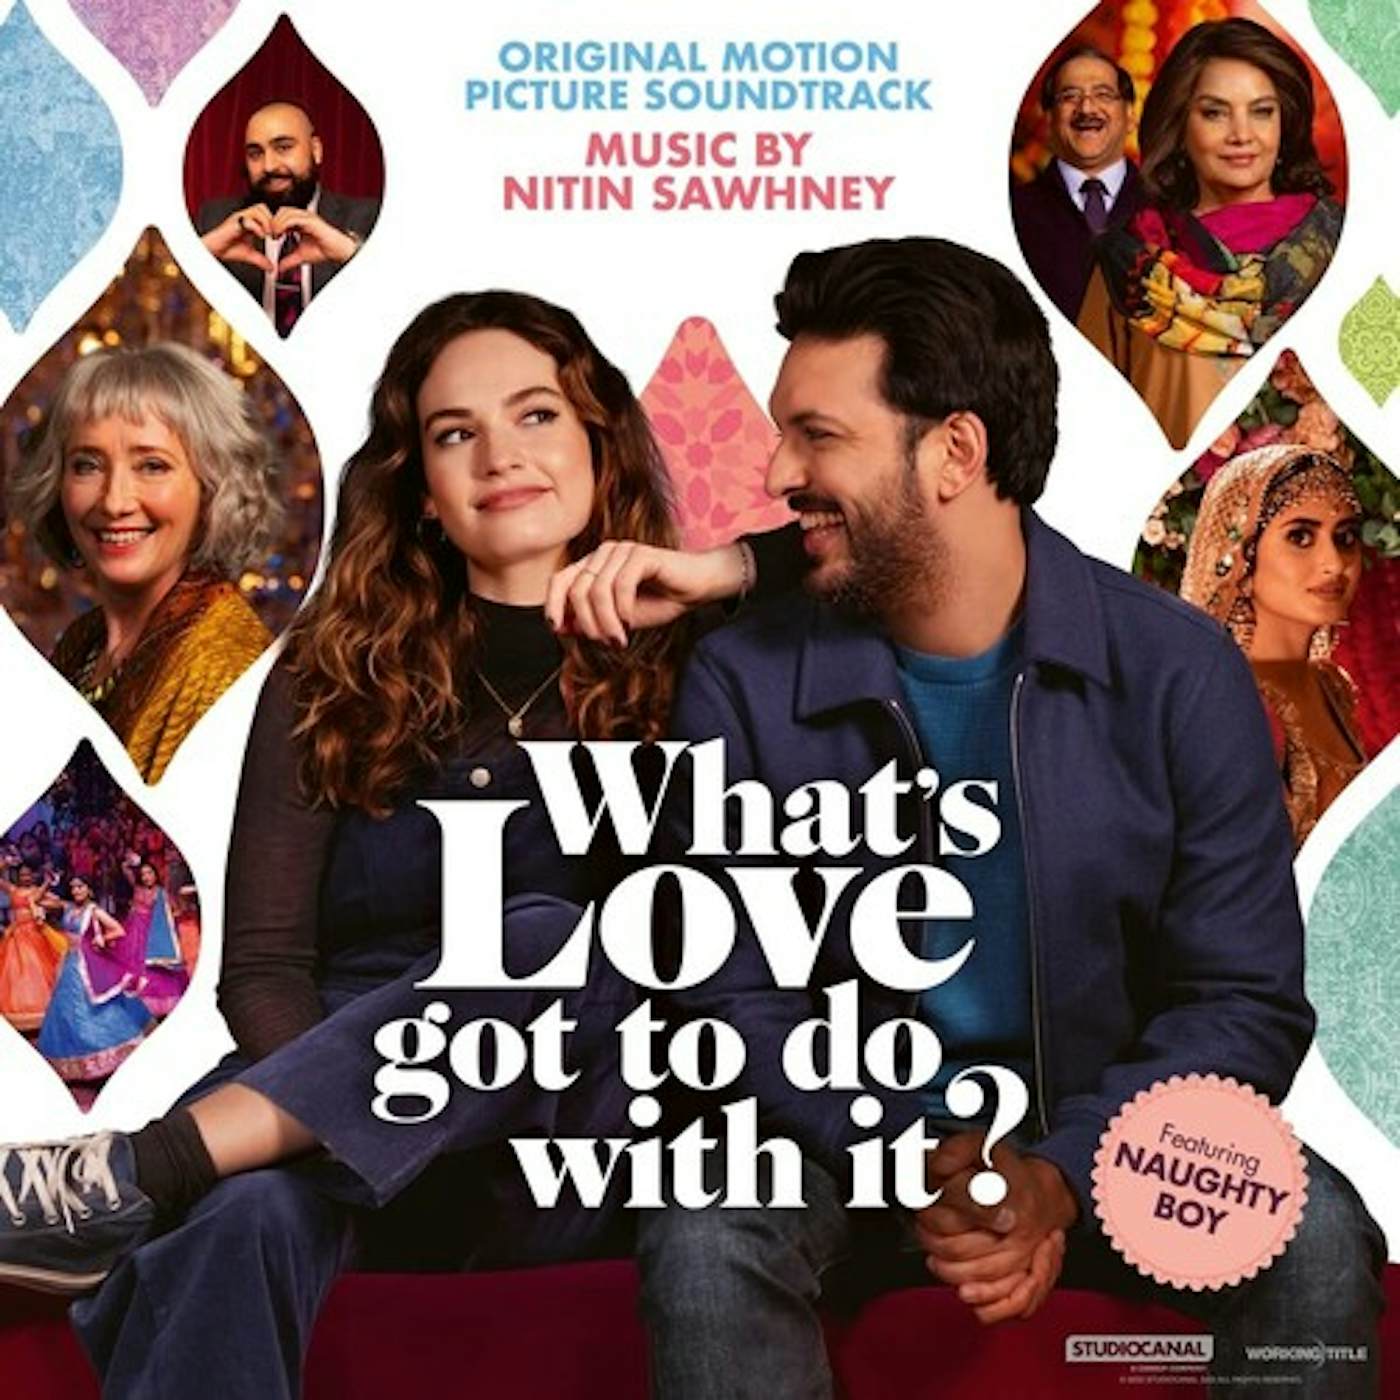 Nitin Sawhney WHAT'S LOVE GOT TO DO WITH IT? - Original Soundtrack Vinyl Record